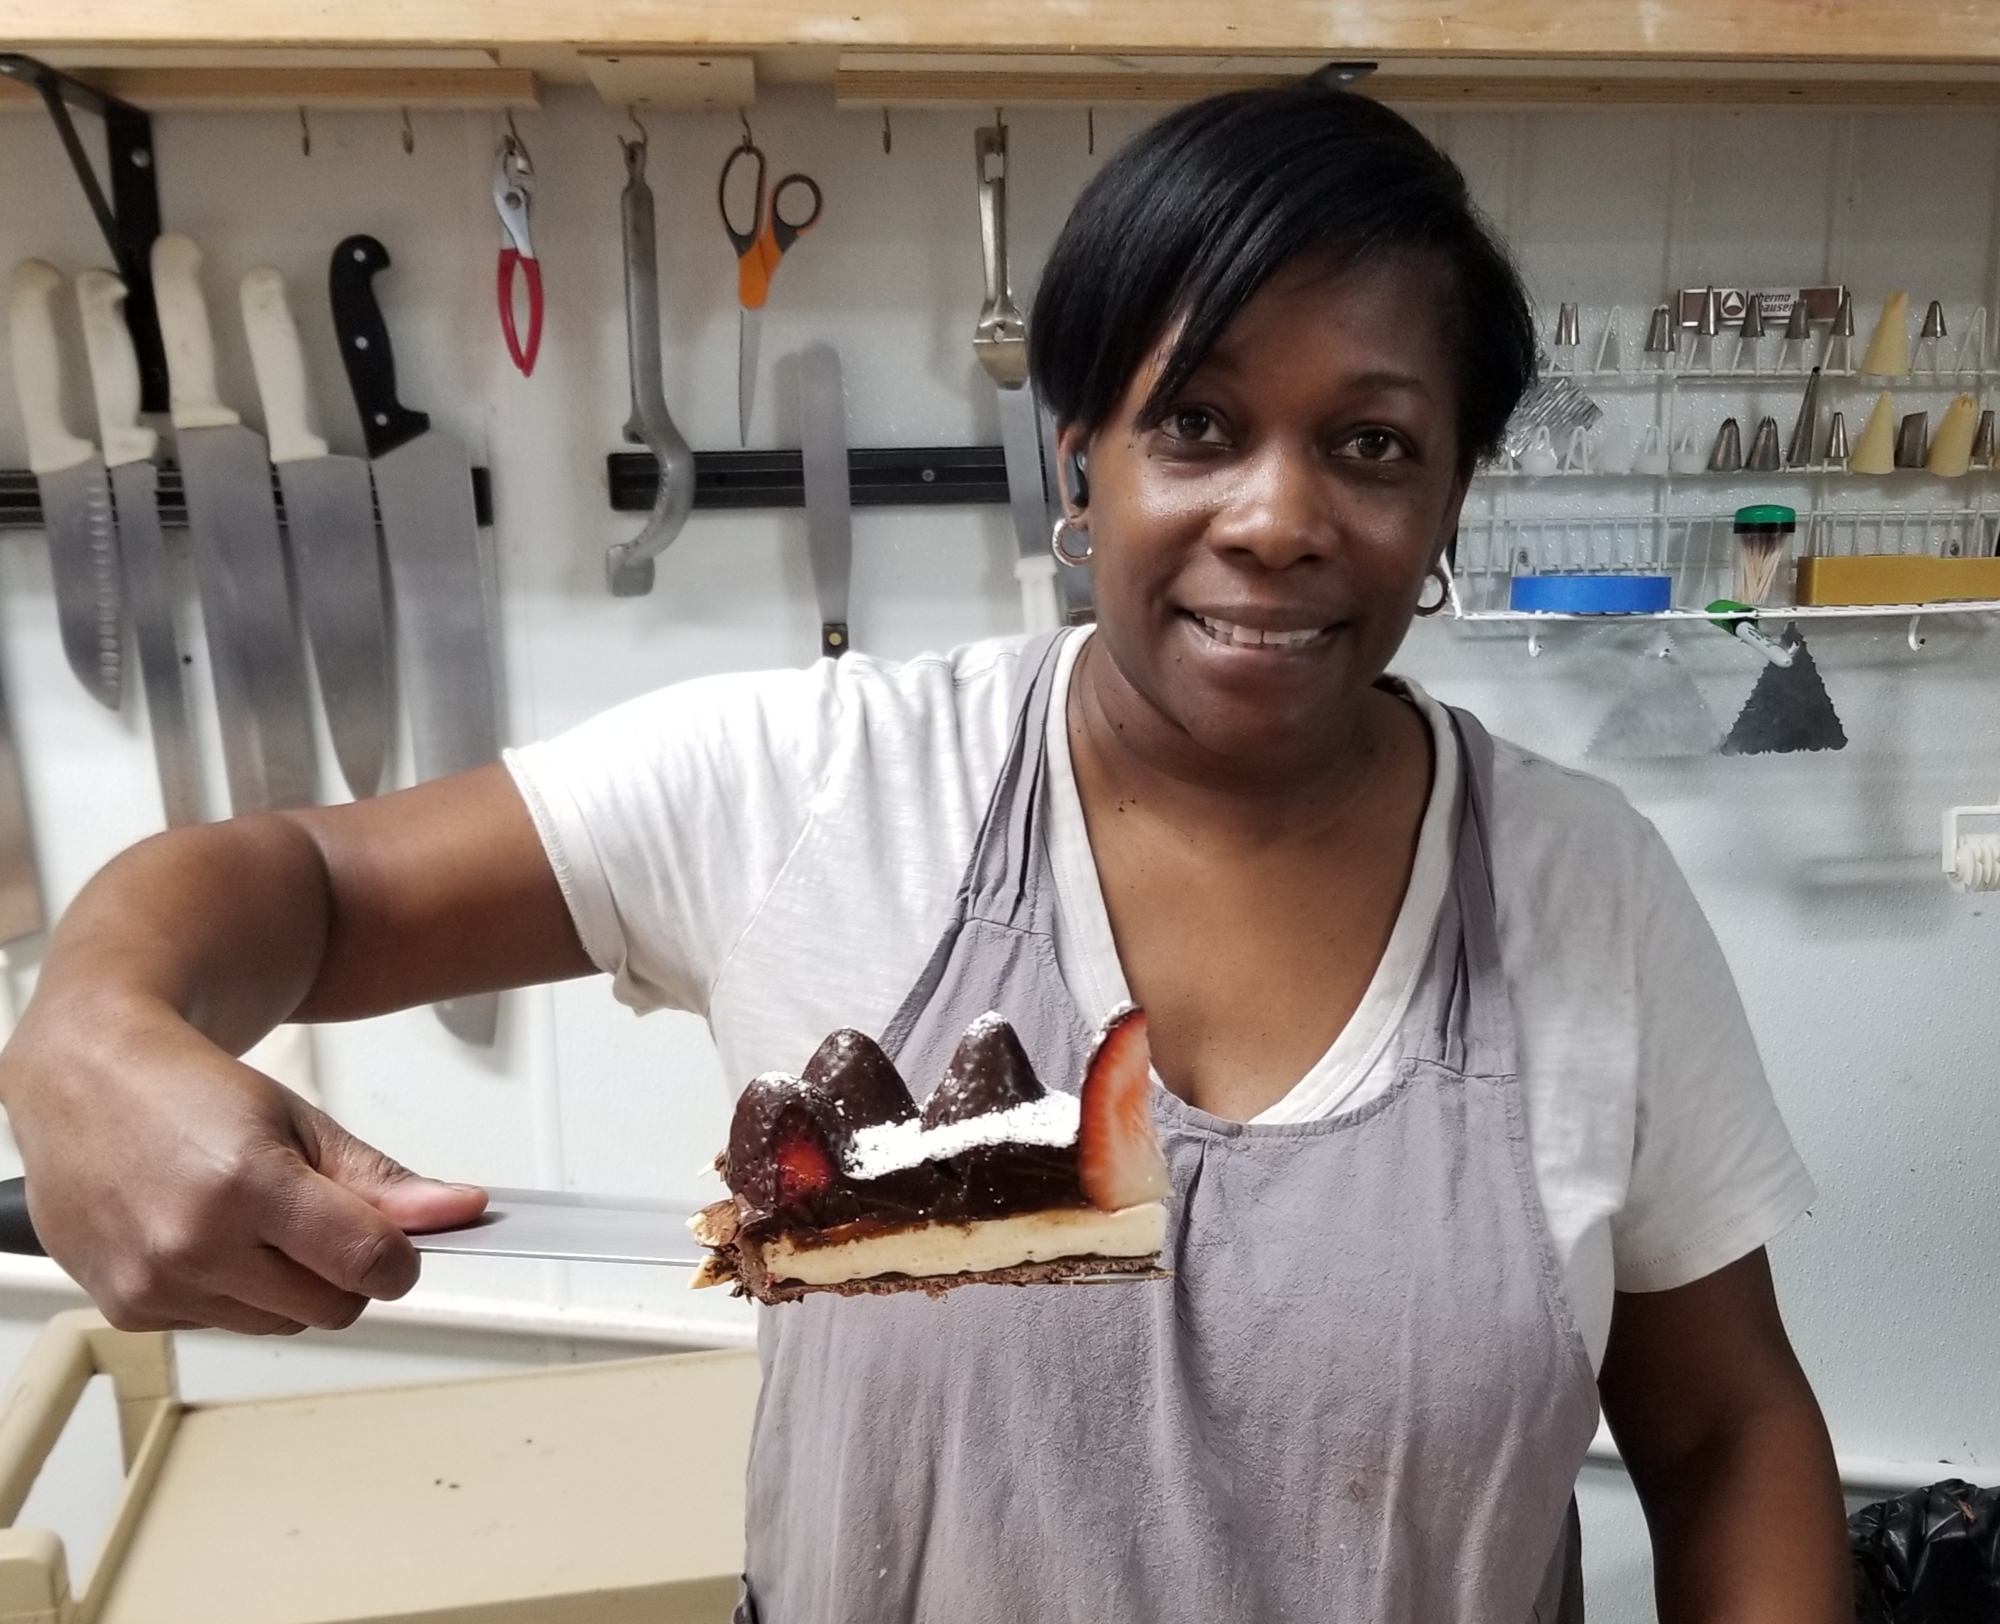 Former Bleu Chocolat Cafe co-owner and chef Erika Cline, who operated the Springfield restaurant before closing it almost three years ago, works closely with Country Harvest Desserts.